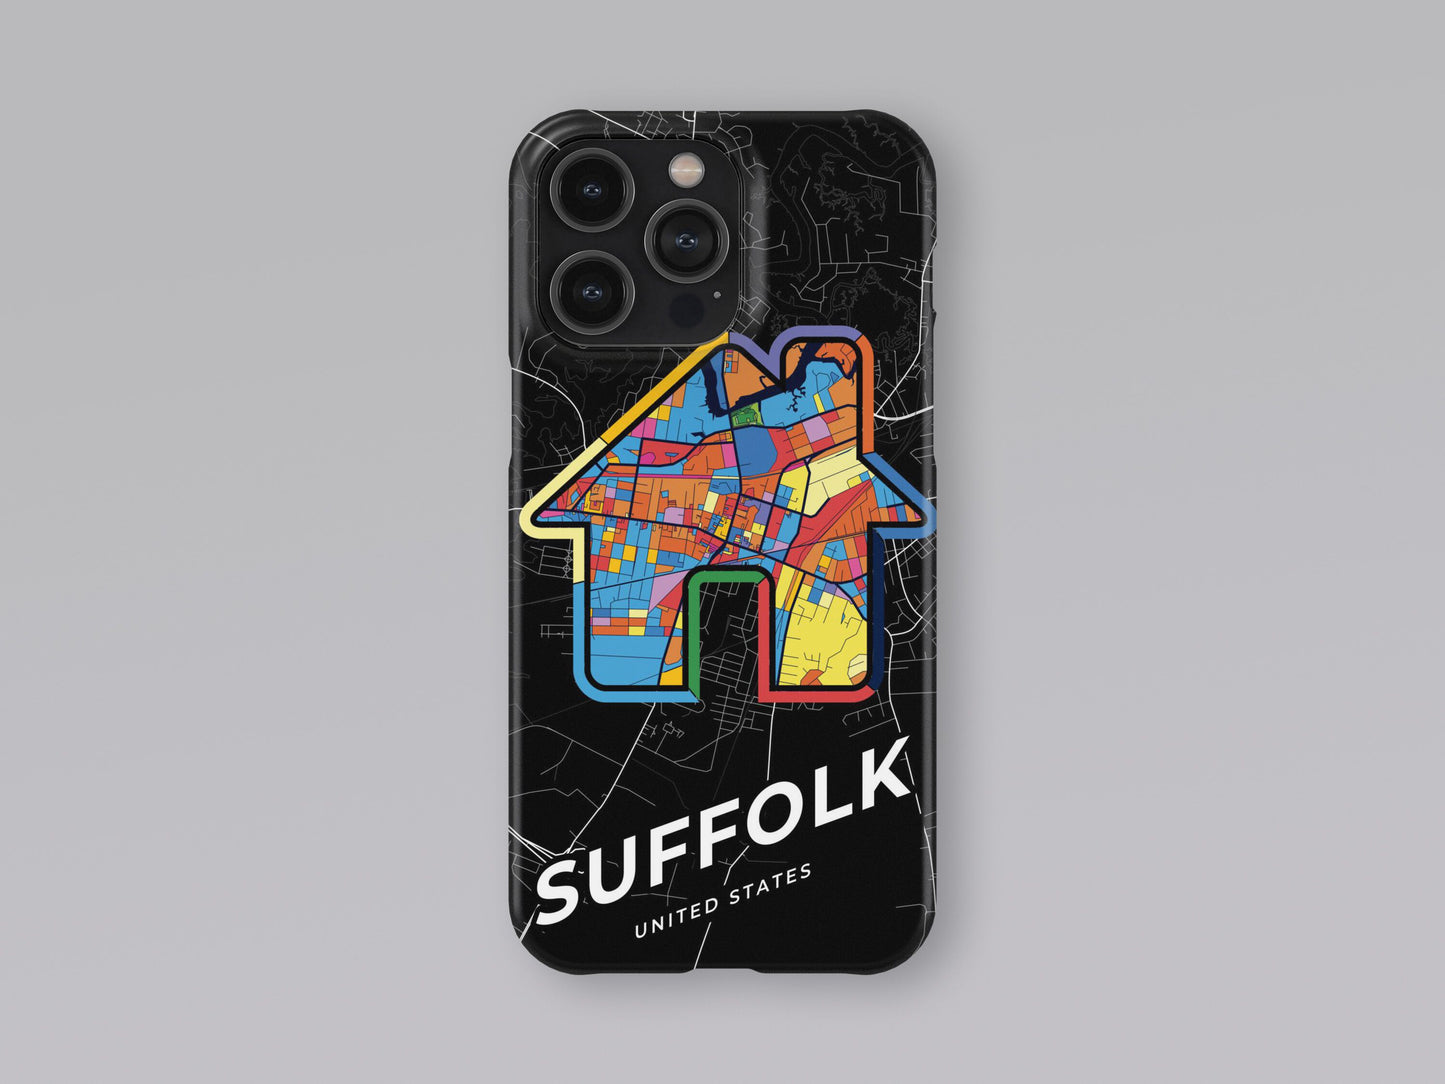 Suffolk Virginia slim phone case with colorful icon 3